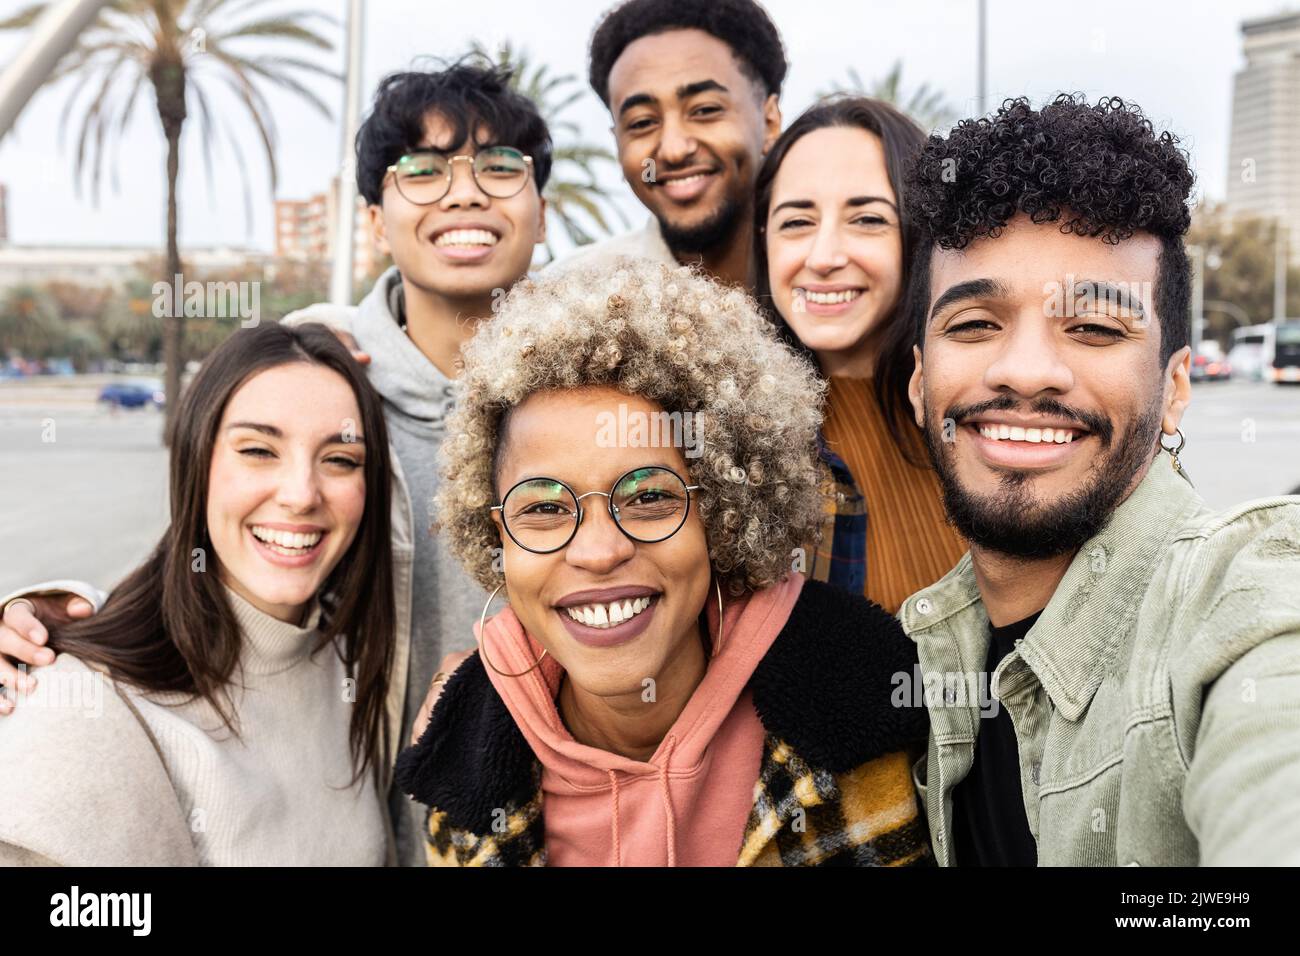 Multiracial group of young friends taking selfie portrait together outdoor Stock Photo